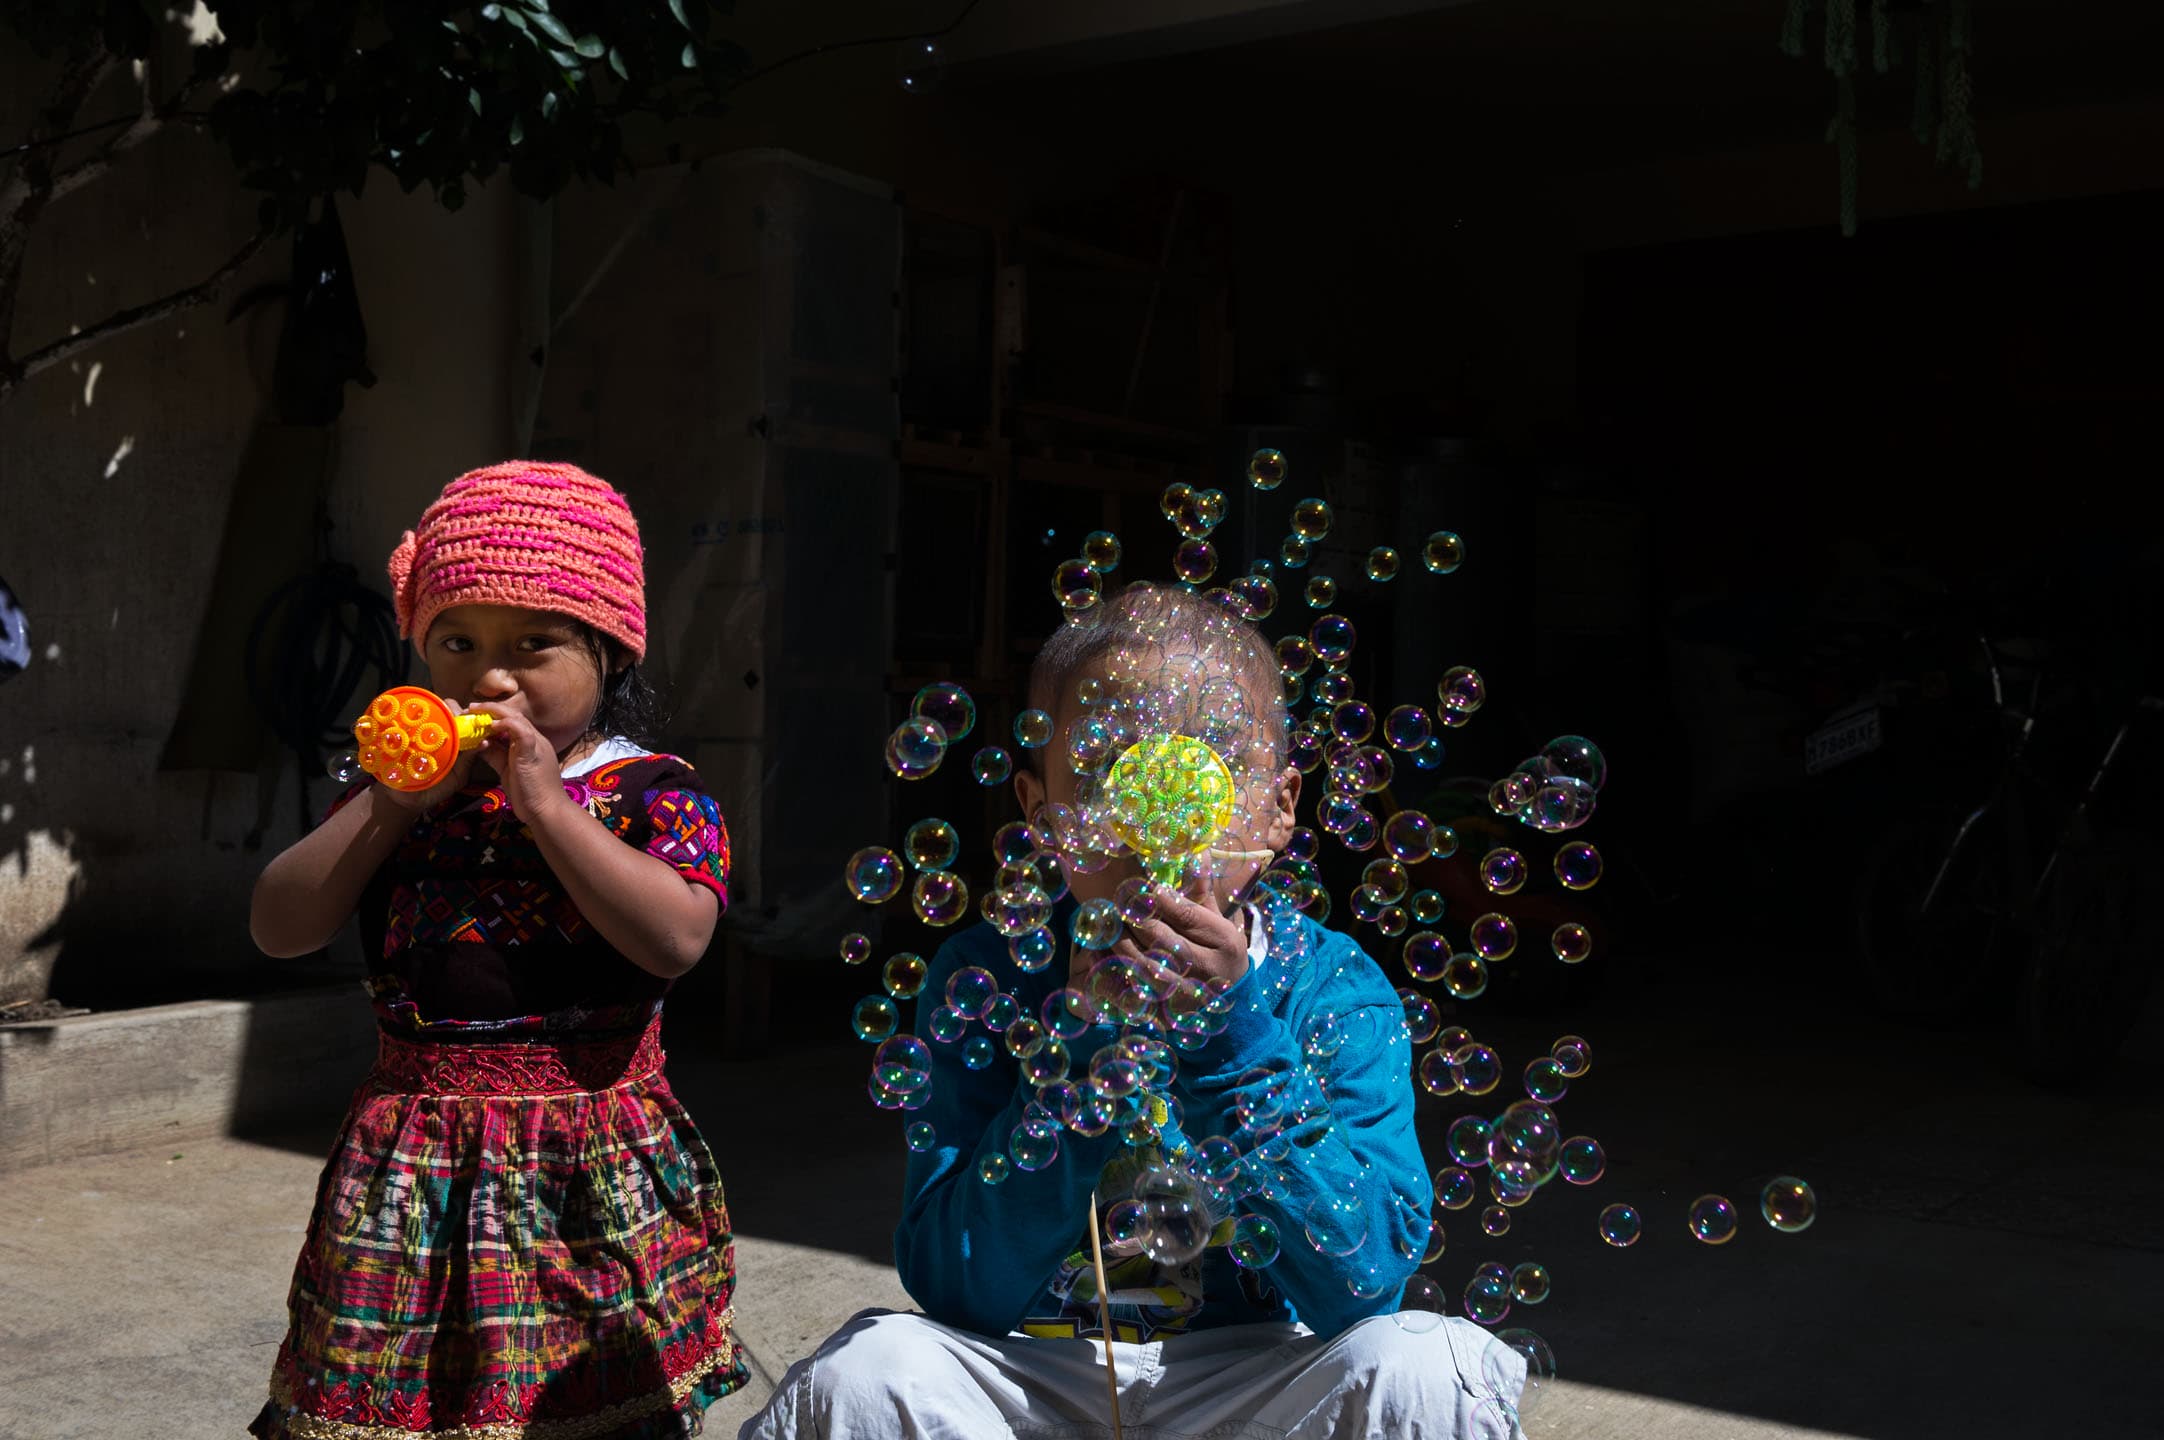 Heber and his younger sister Saraí Menchu Tamayac (age 3) make bubbles in the courtyard at his family’s home.